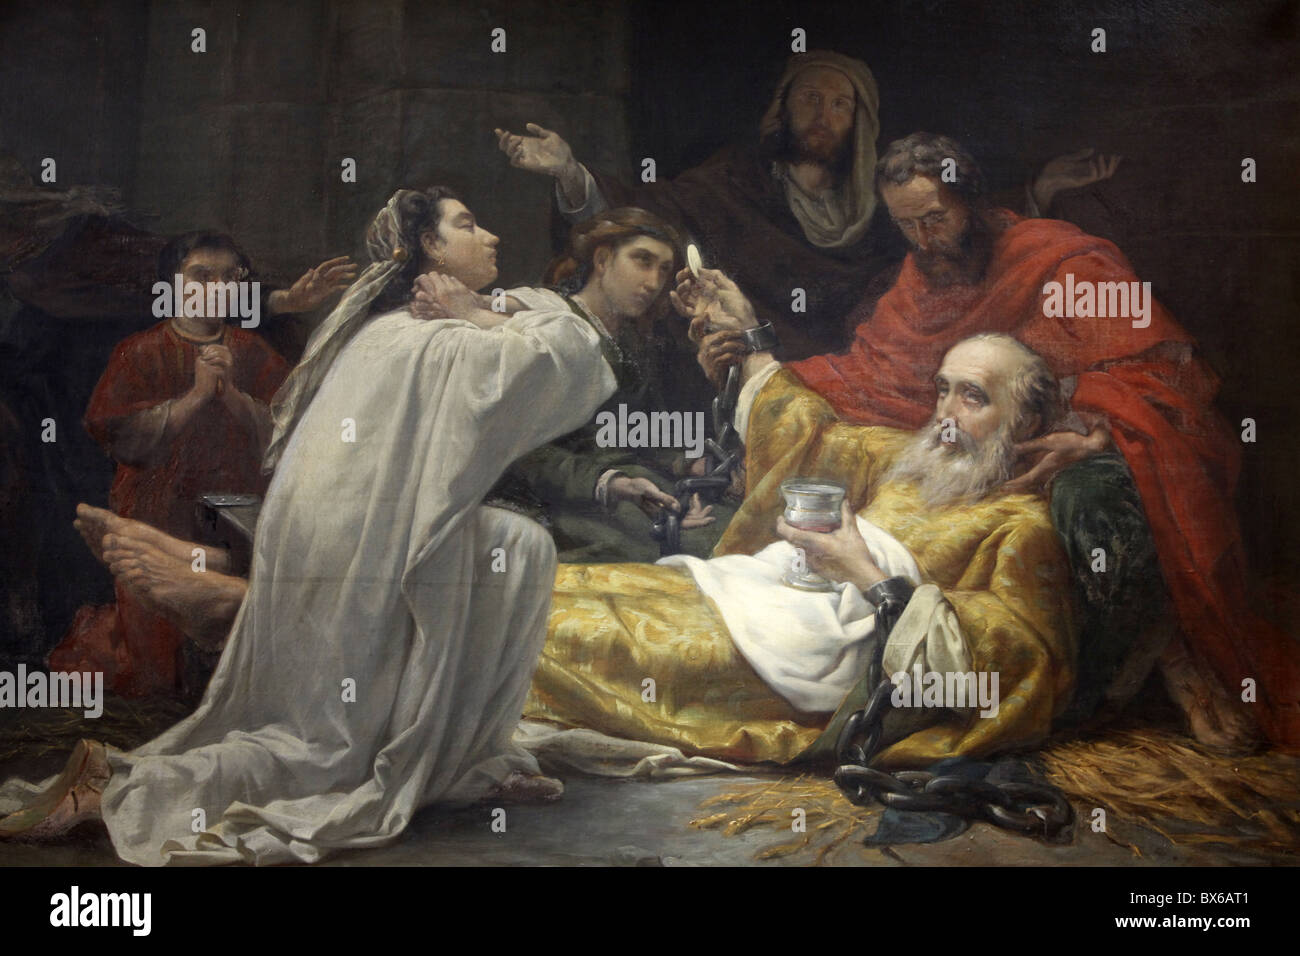 Painting of Saint-Francois-Xavier's death in Saint-Francois-Xavier church, Paris, France, Europe Stock Photo